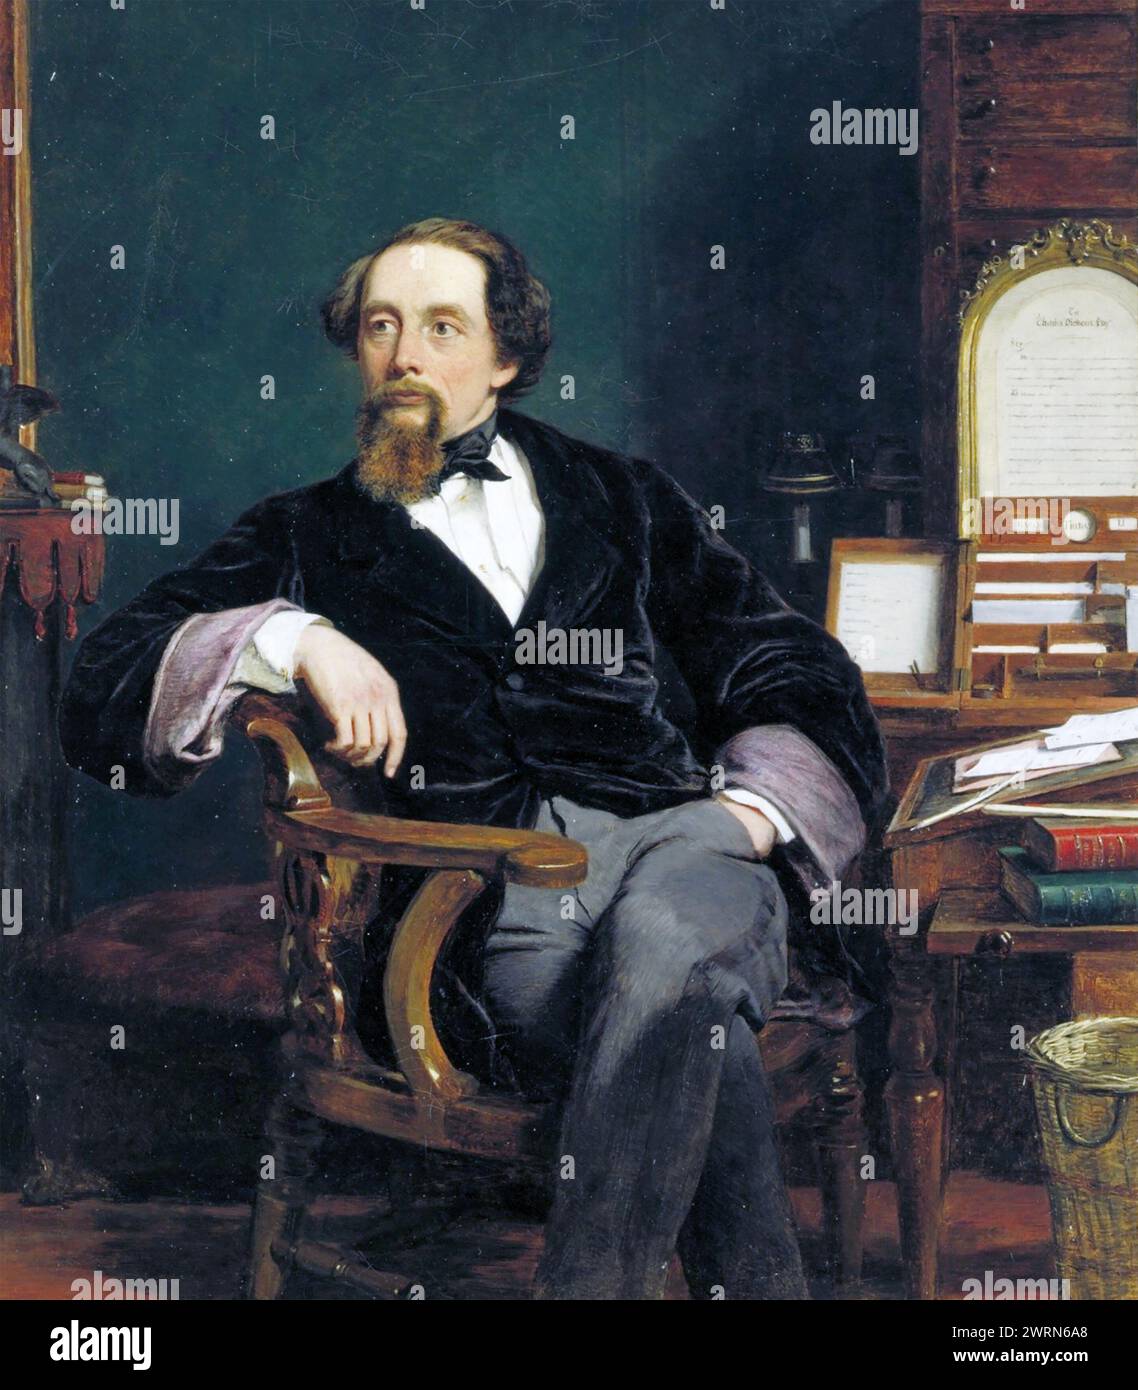 CHARLES DICKENS IN HIS STUDY  1859 painting by English artist William Frith Stock Photo